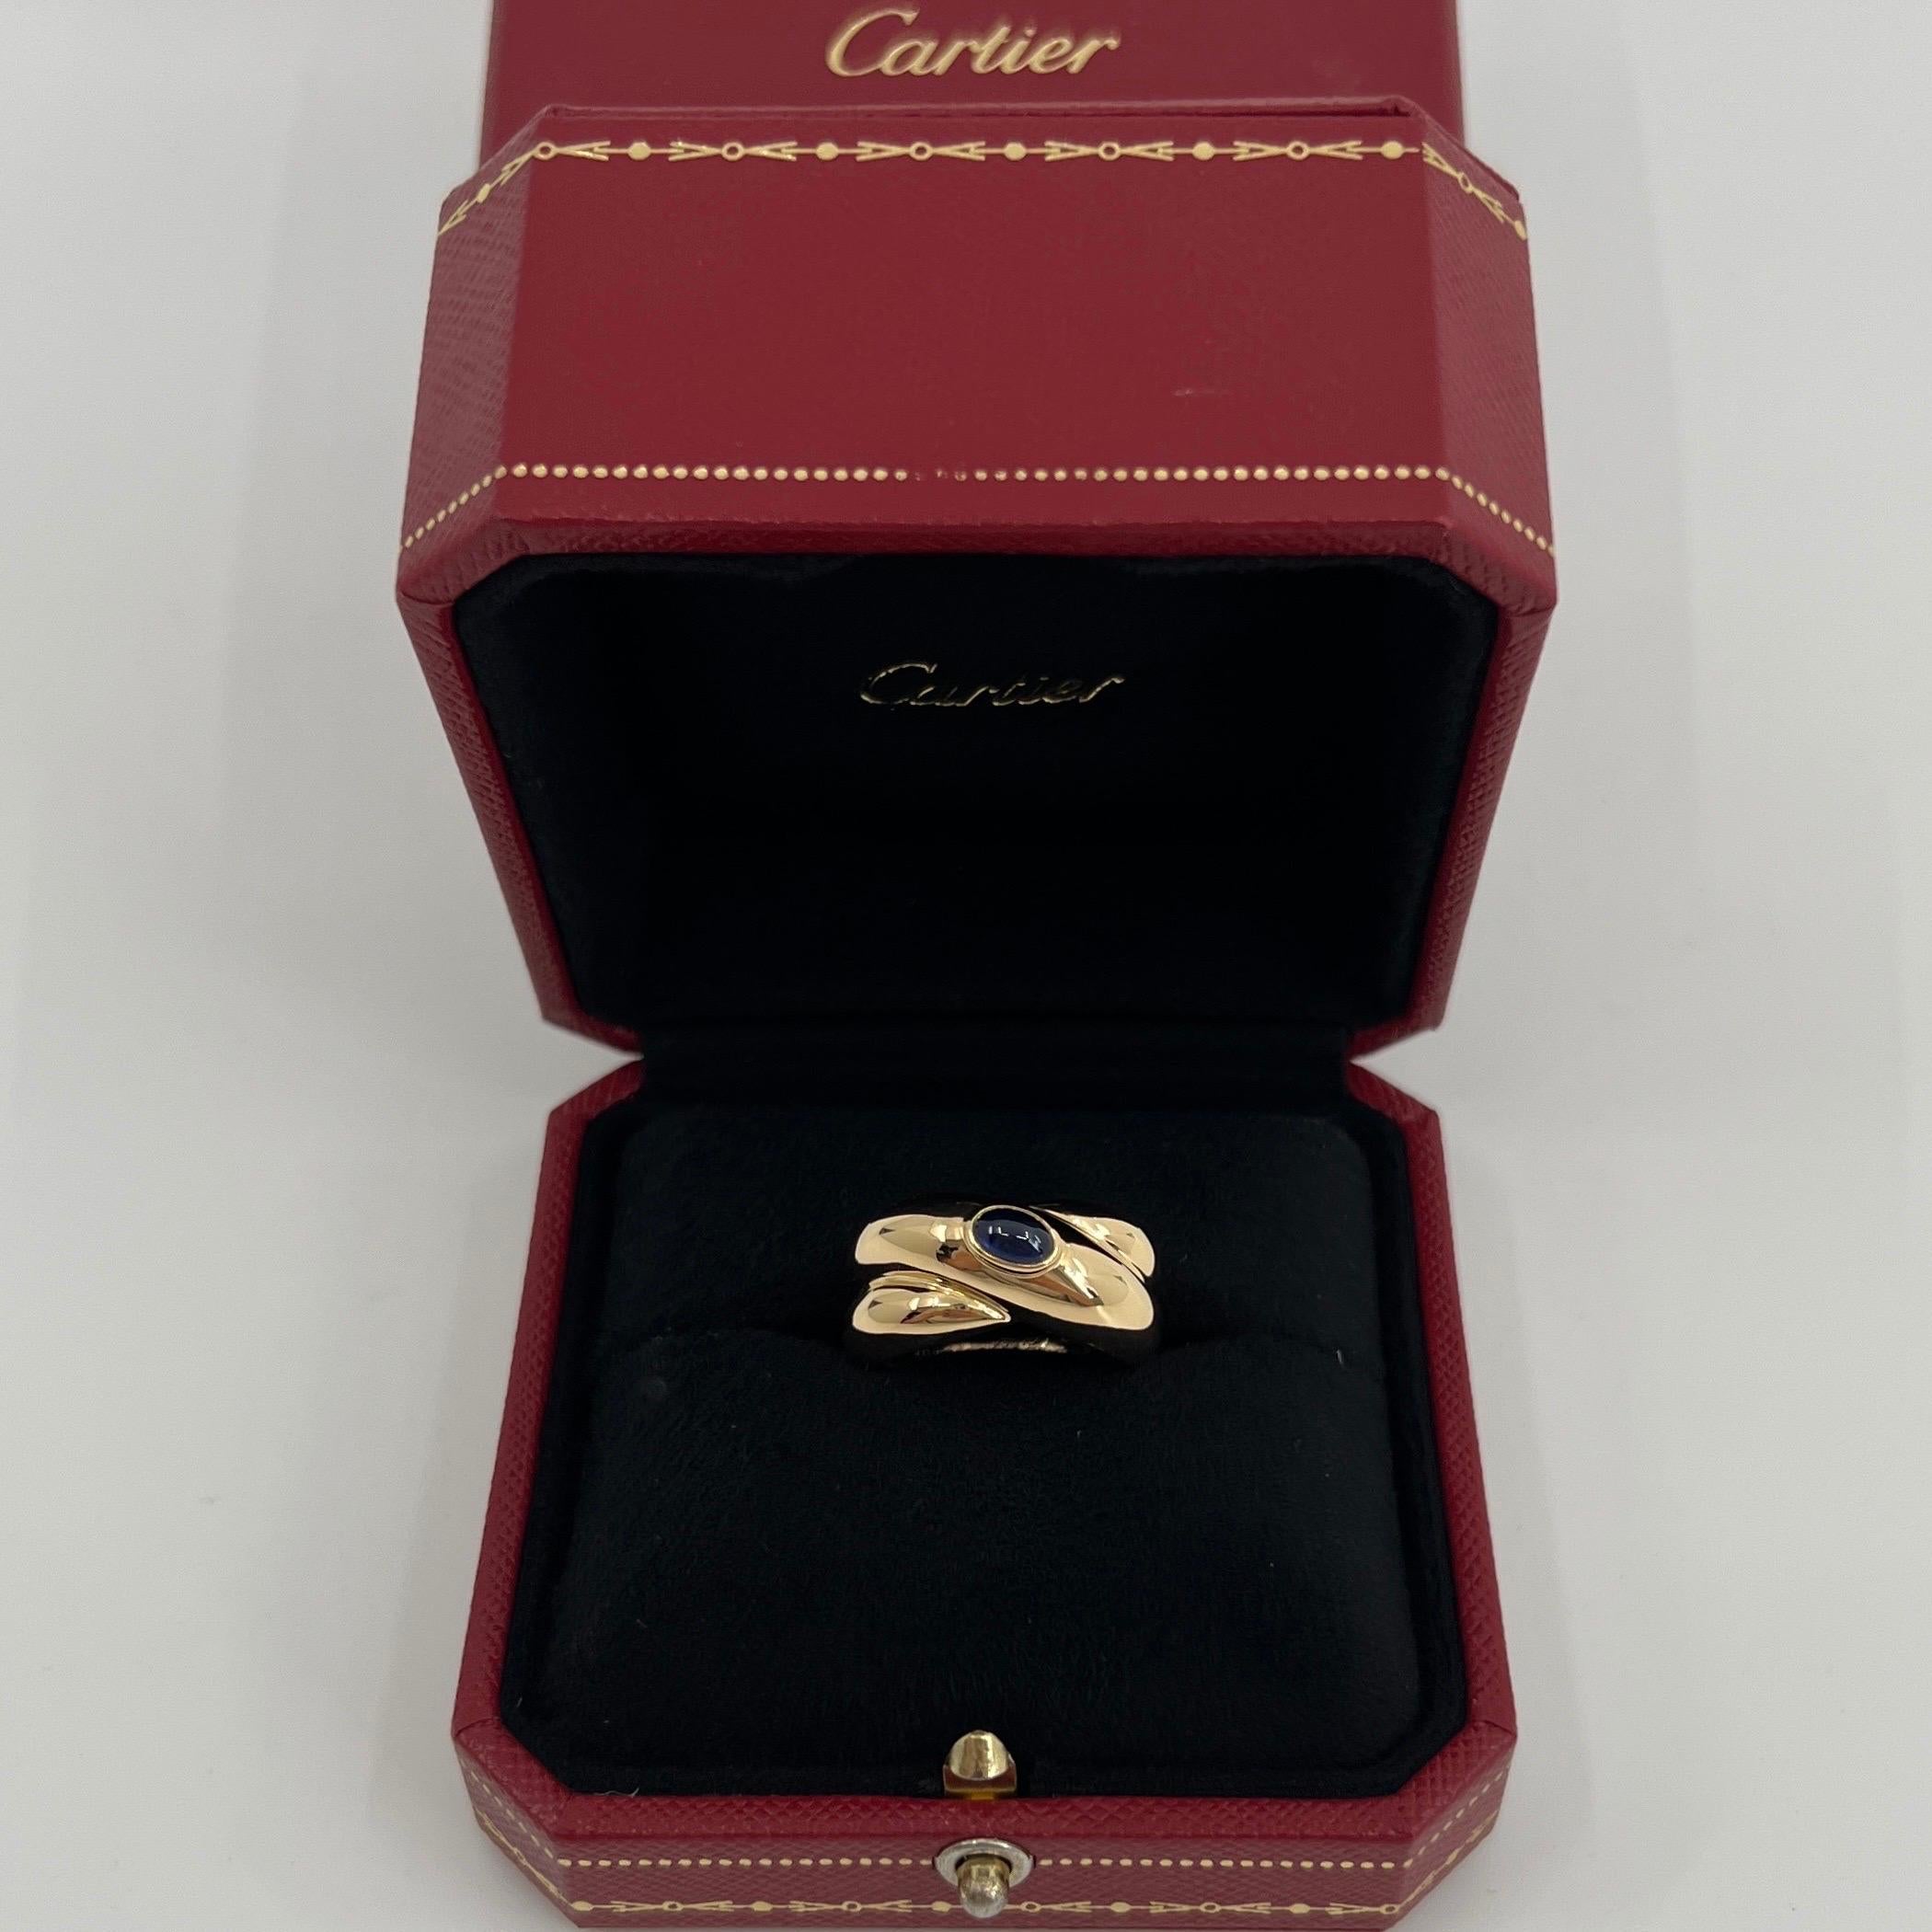 Vintage Cartier Deep Blue Sapphire 18k Yellow Gold Dome Ring.

Stunning yellow gold ring set with a fine deep blue sapphire. Fine jewellery houses like Cartier only use the finest of gemstones and this sapphire is no exception. A top quality